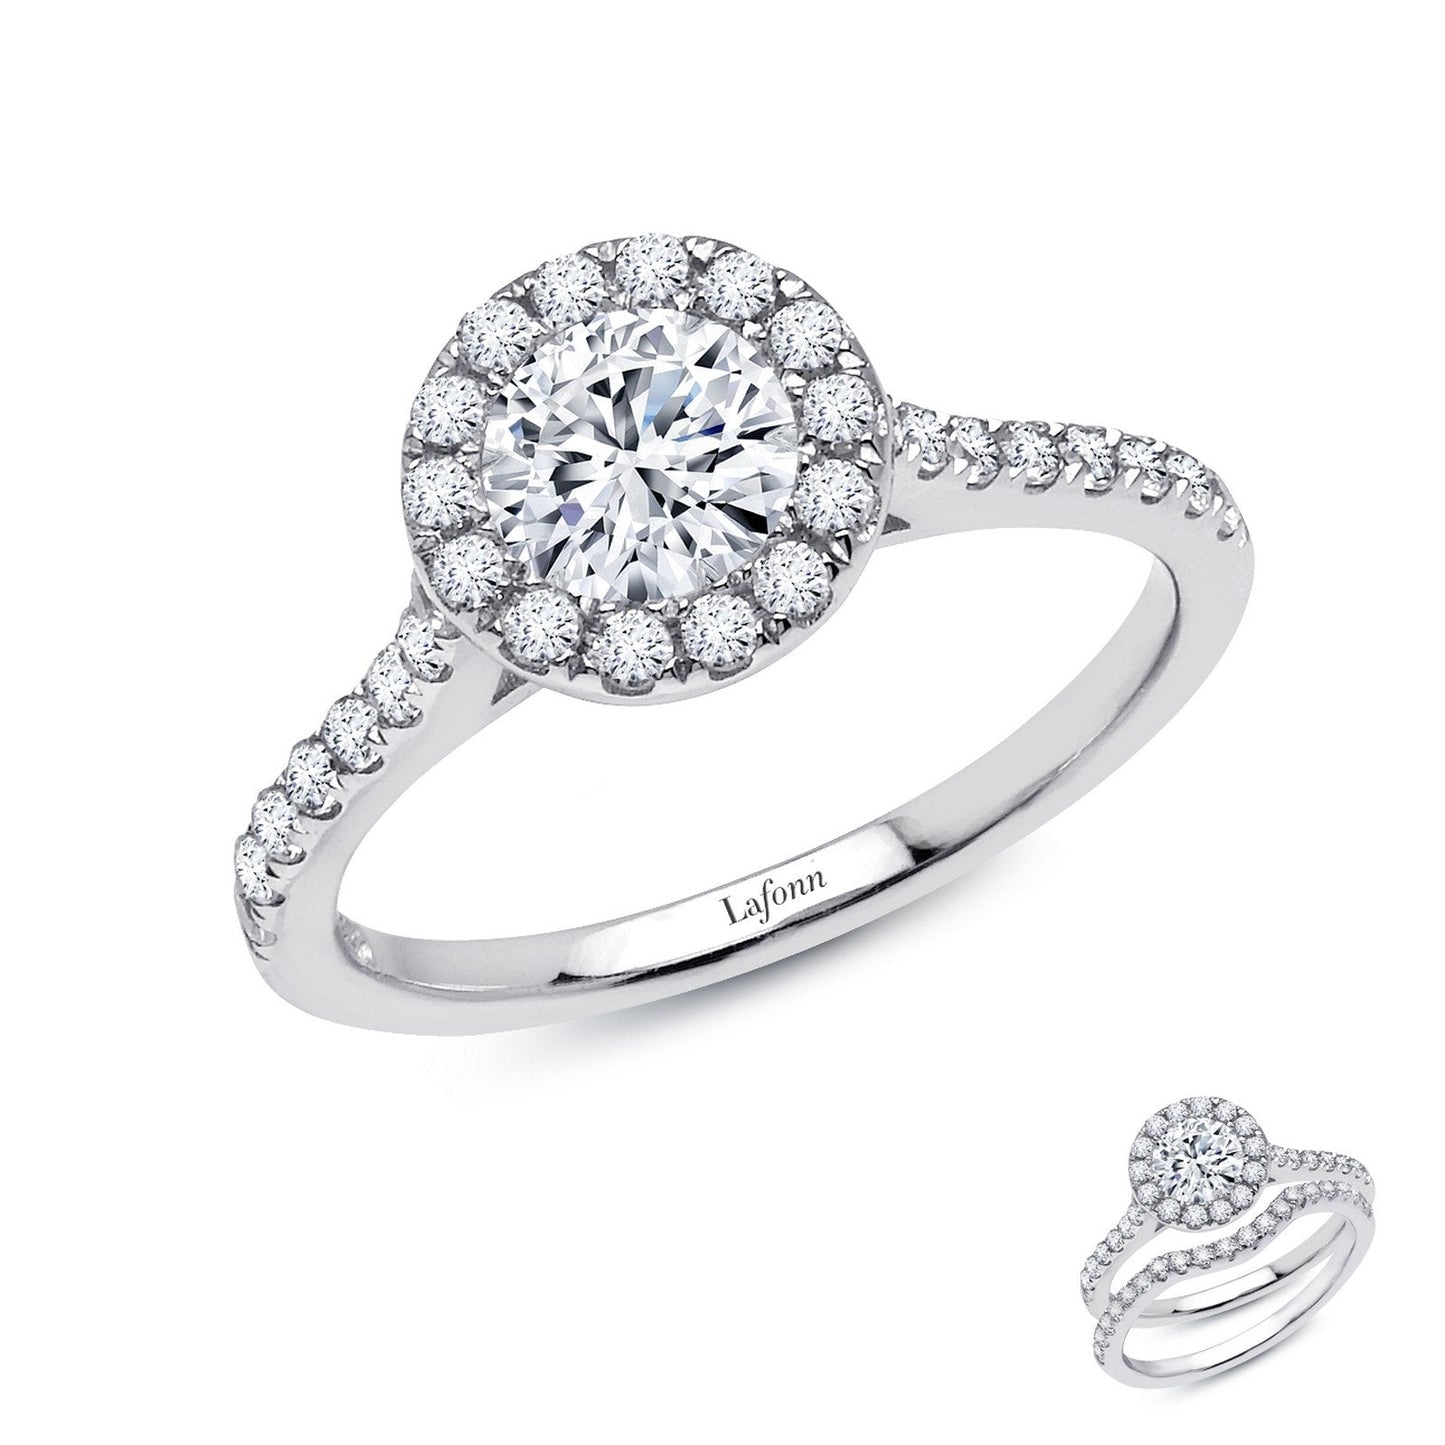 LaFonn Platinum Simulated Diamond  6.00mm Round, Approx. 0.84 CTW RINGS 1.2 CTW Halo Engagement Ring